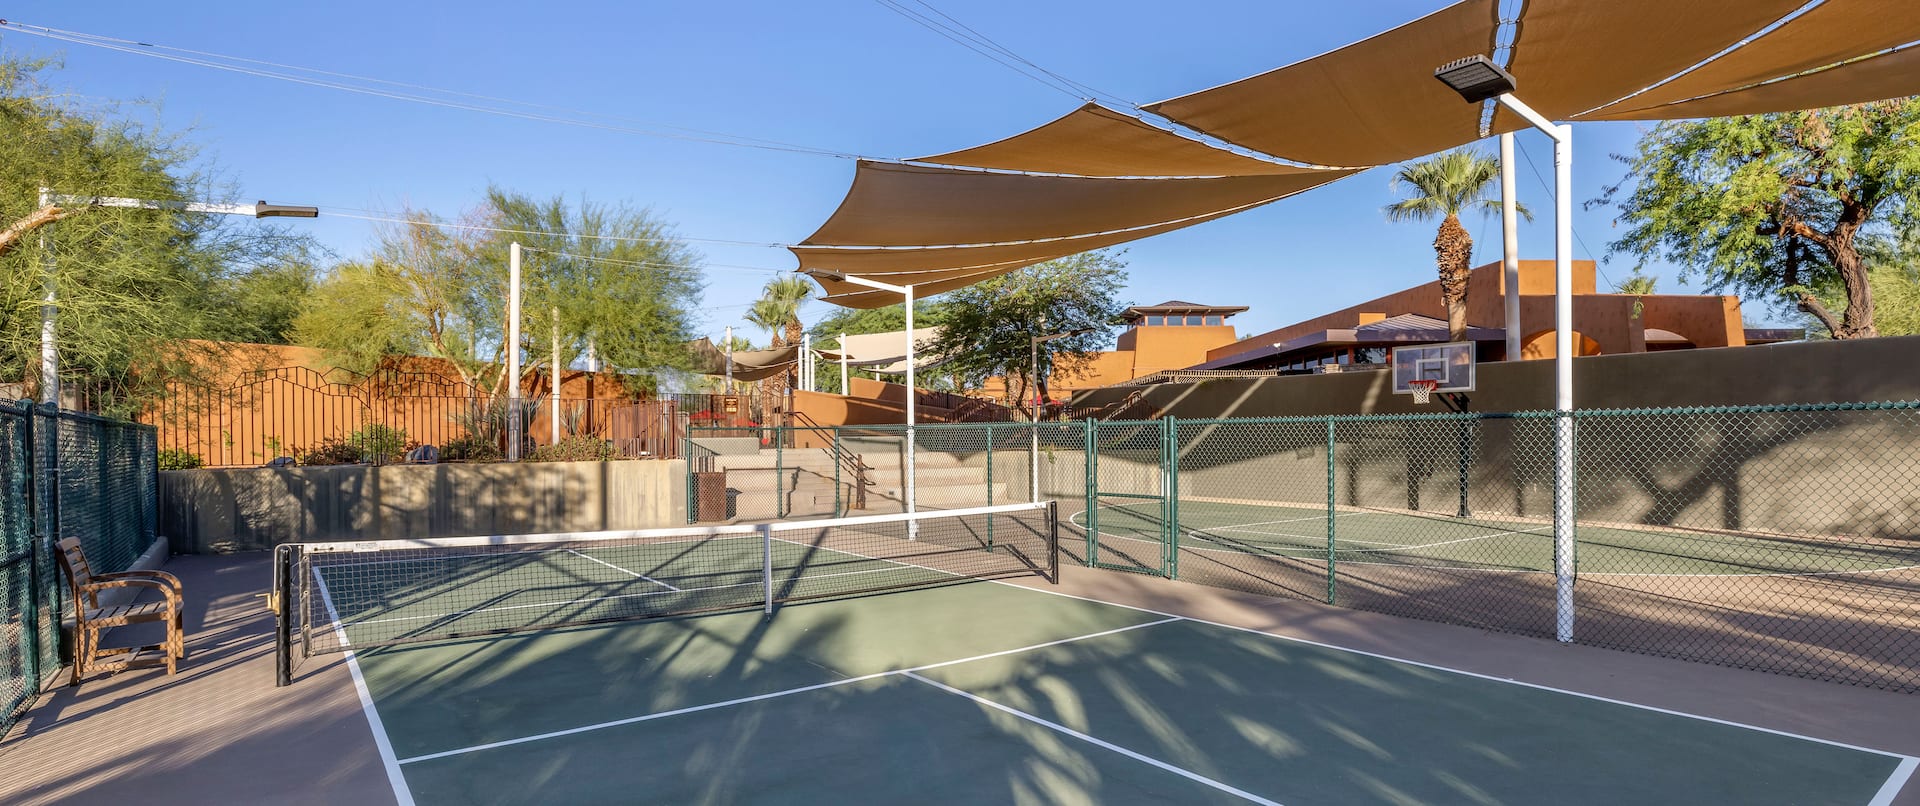 Sports Court With Pickleball And Basketball